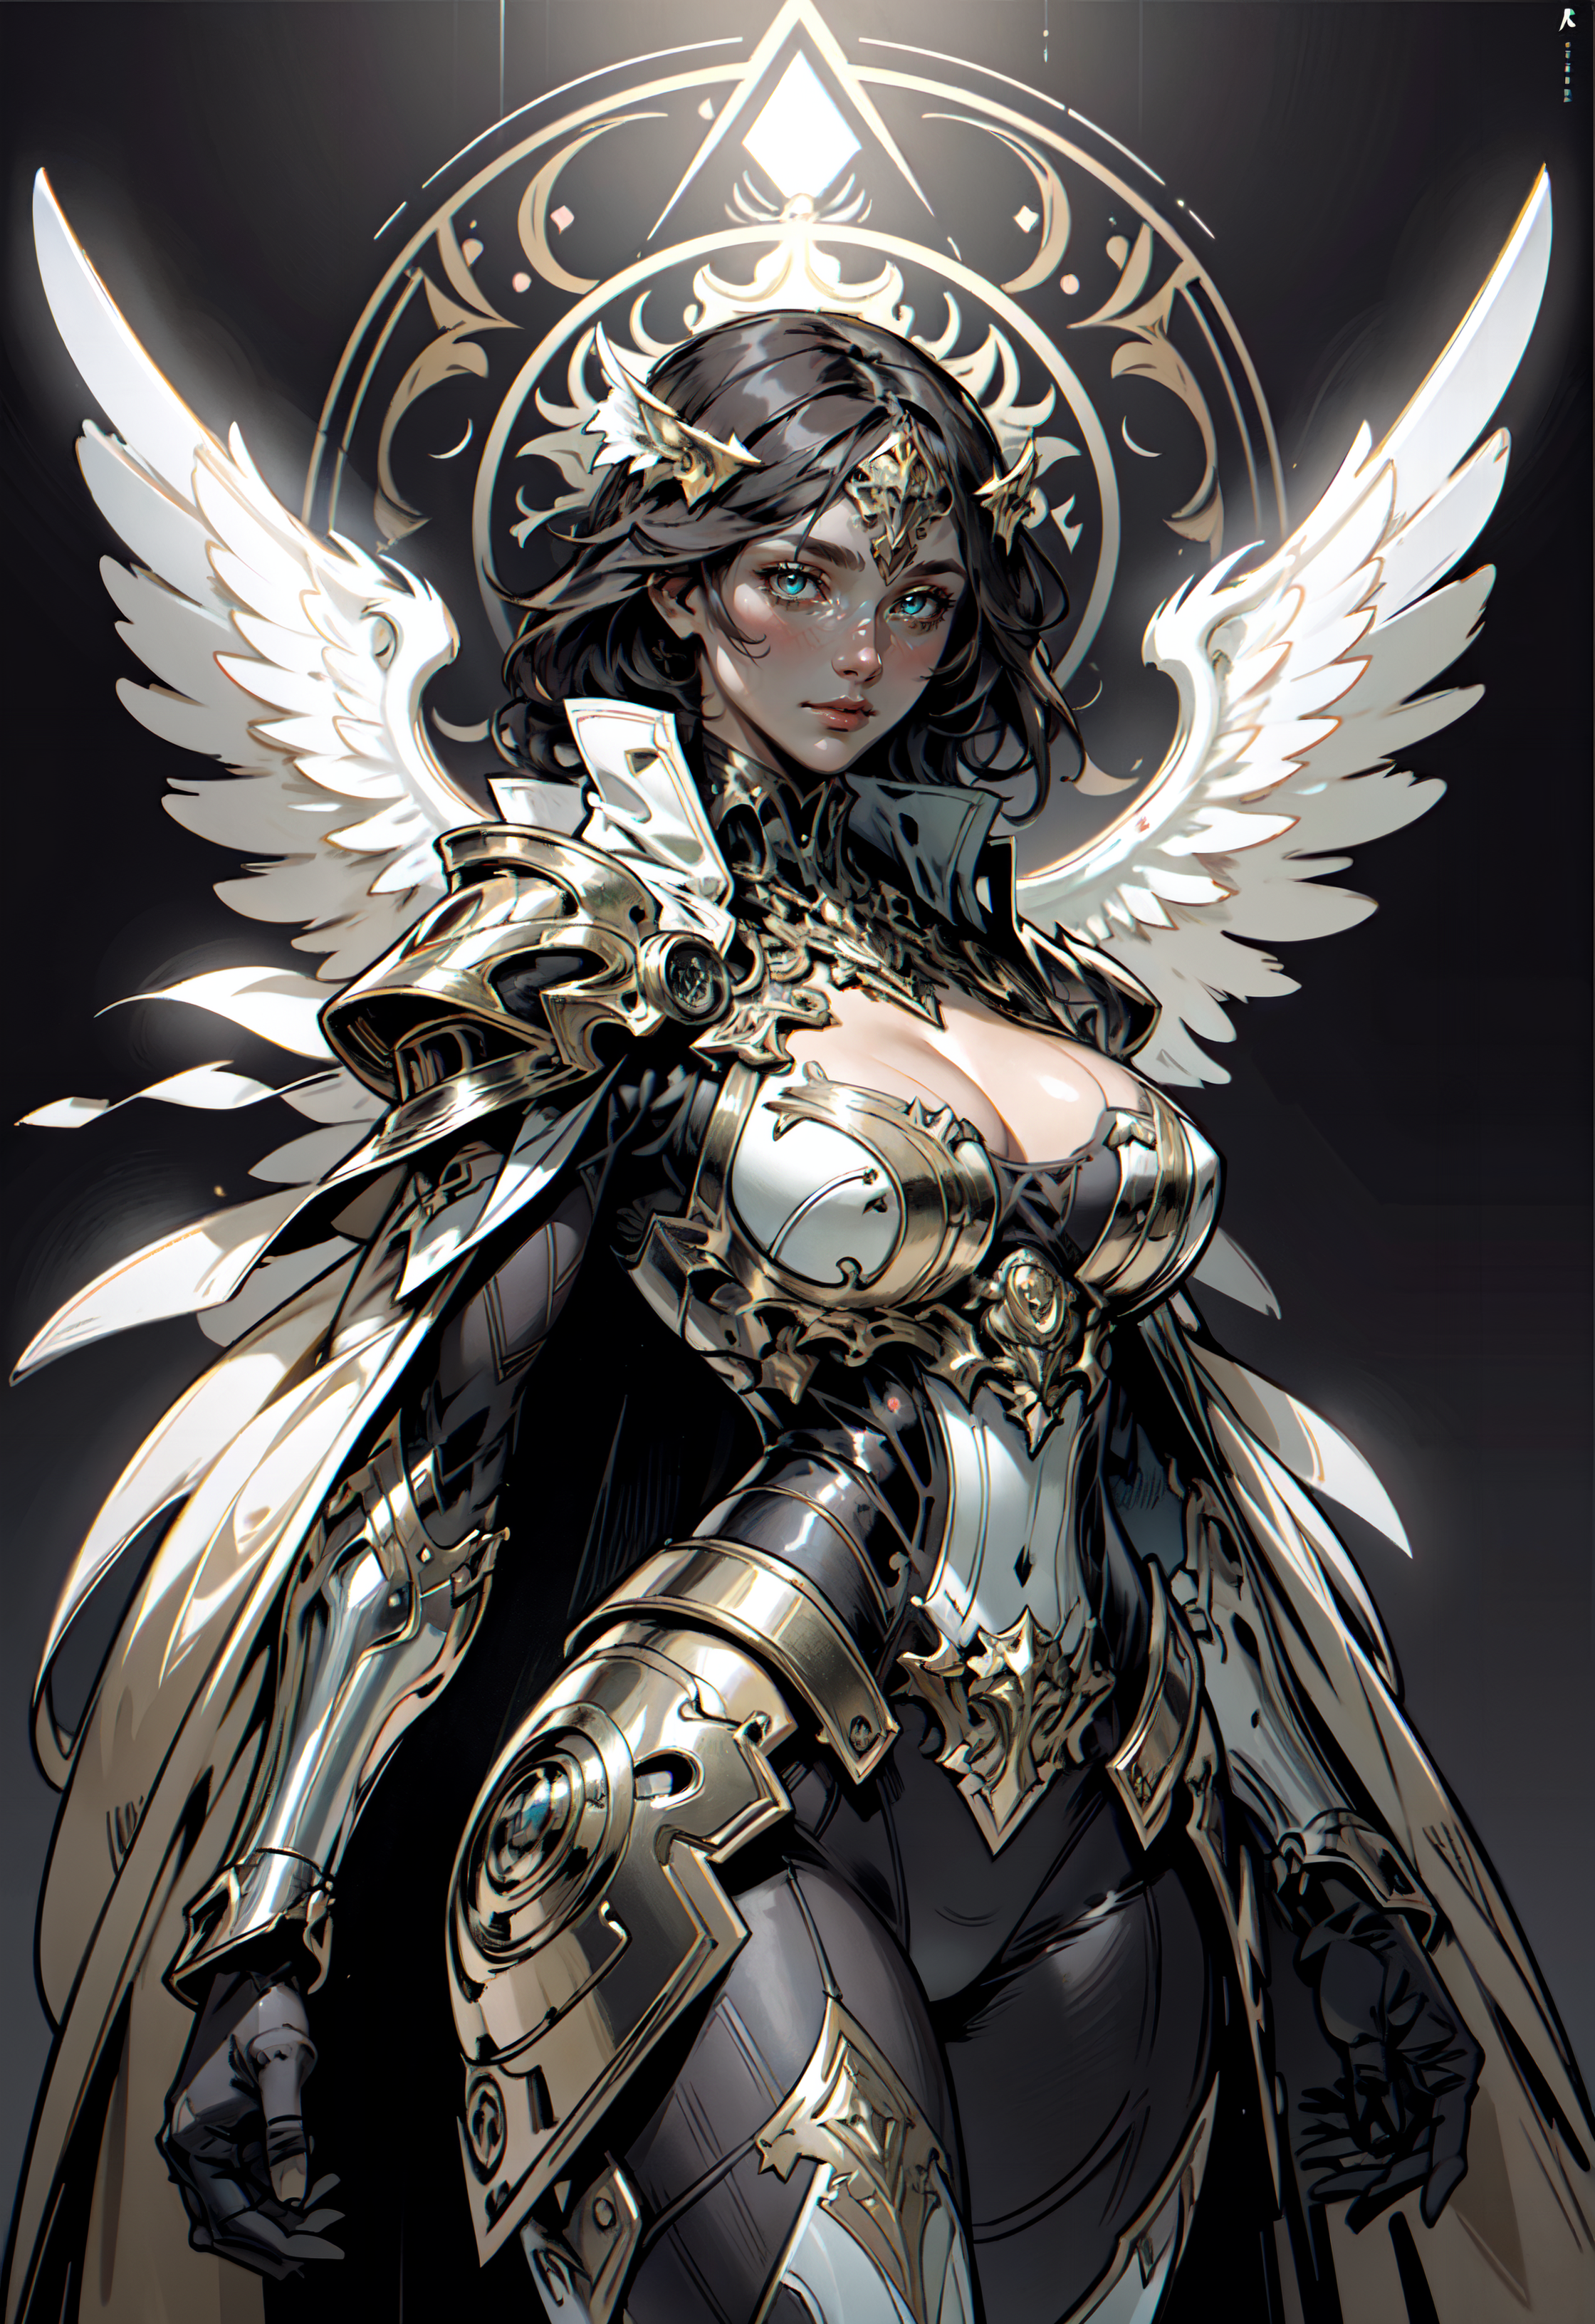 Anime style illustration of a woman with wings as an angel, wearing a white and gold outfit.